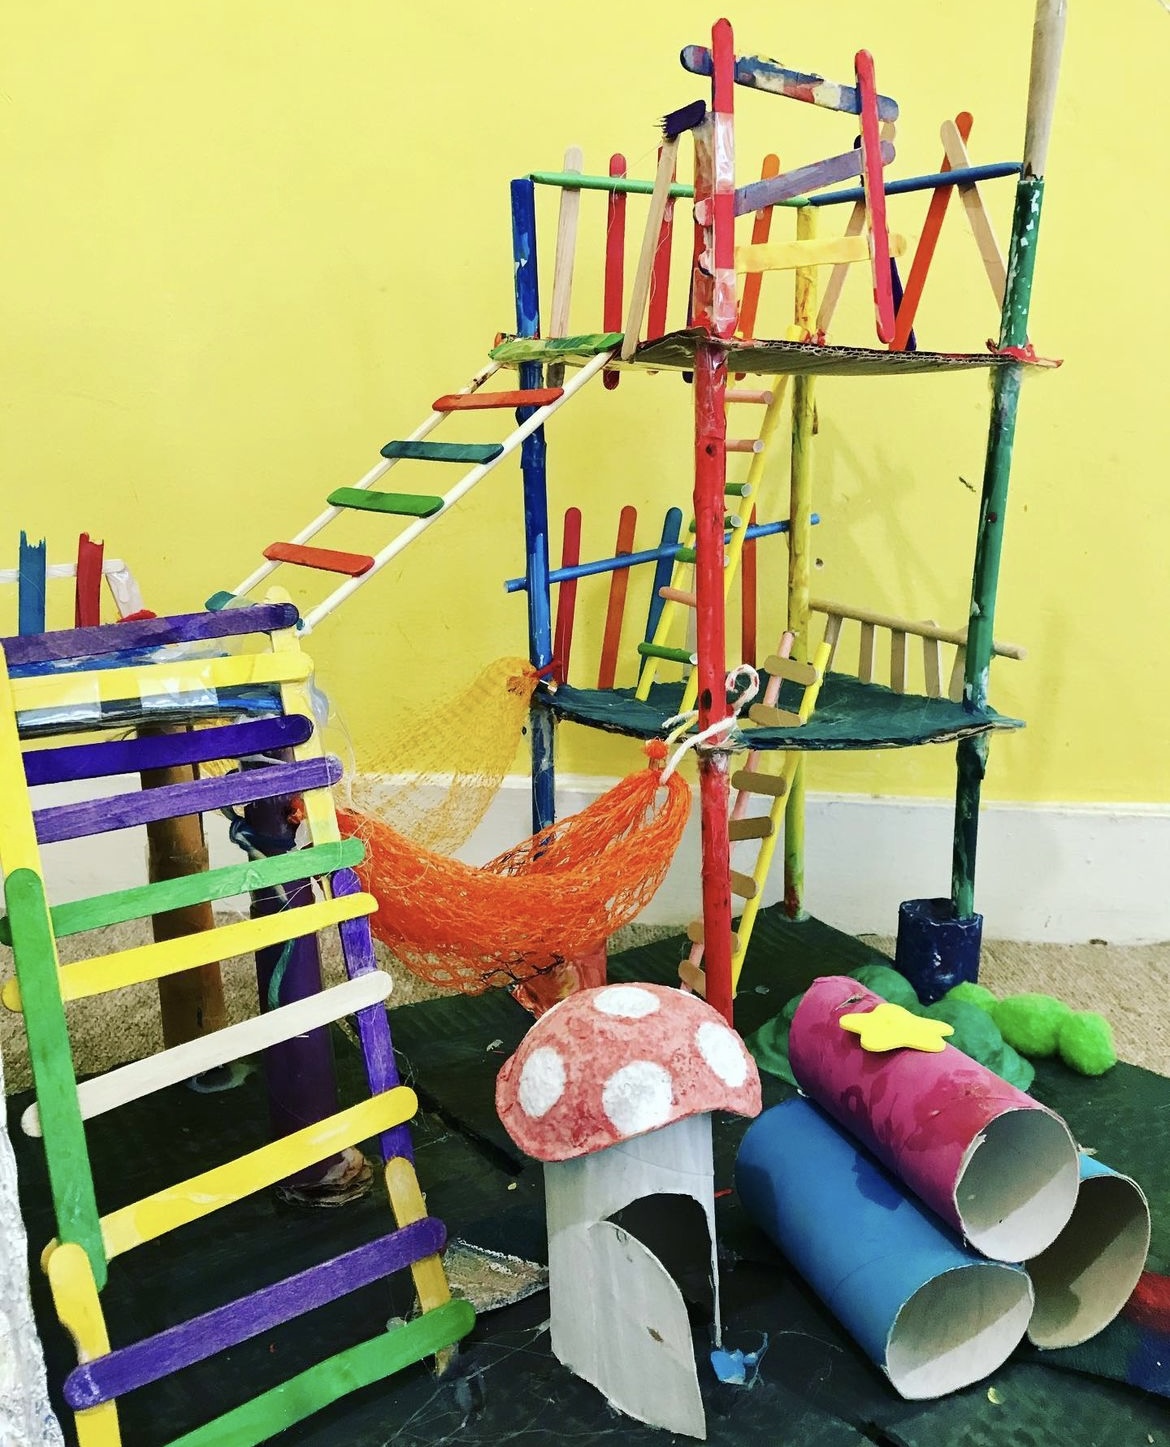 Colorful model of an adventure playground made out of junk materials e.g. ladders made of ice lolly sticks, hammock made of tangerine netting and mushroom made of toilet roll tube